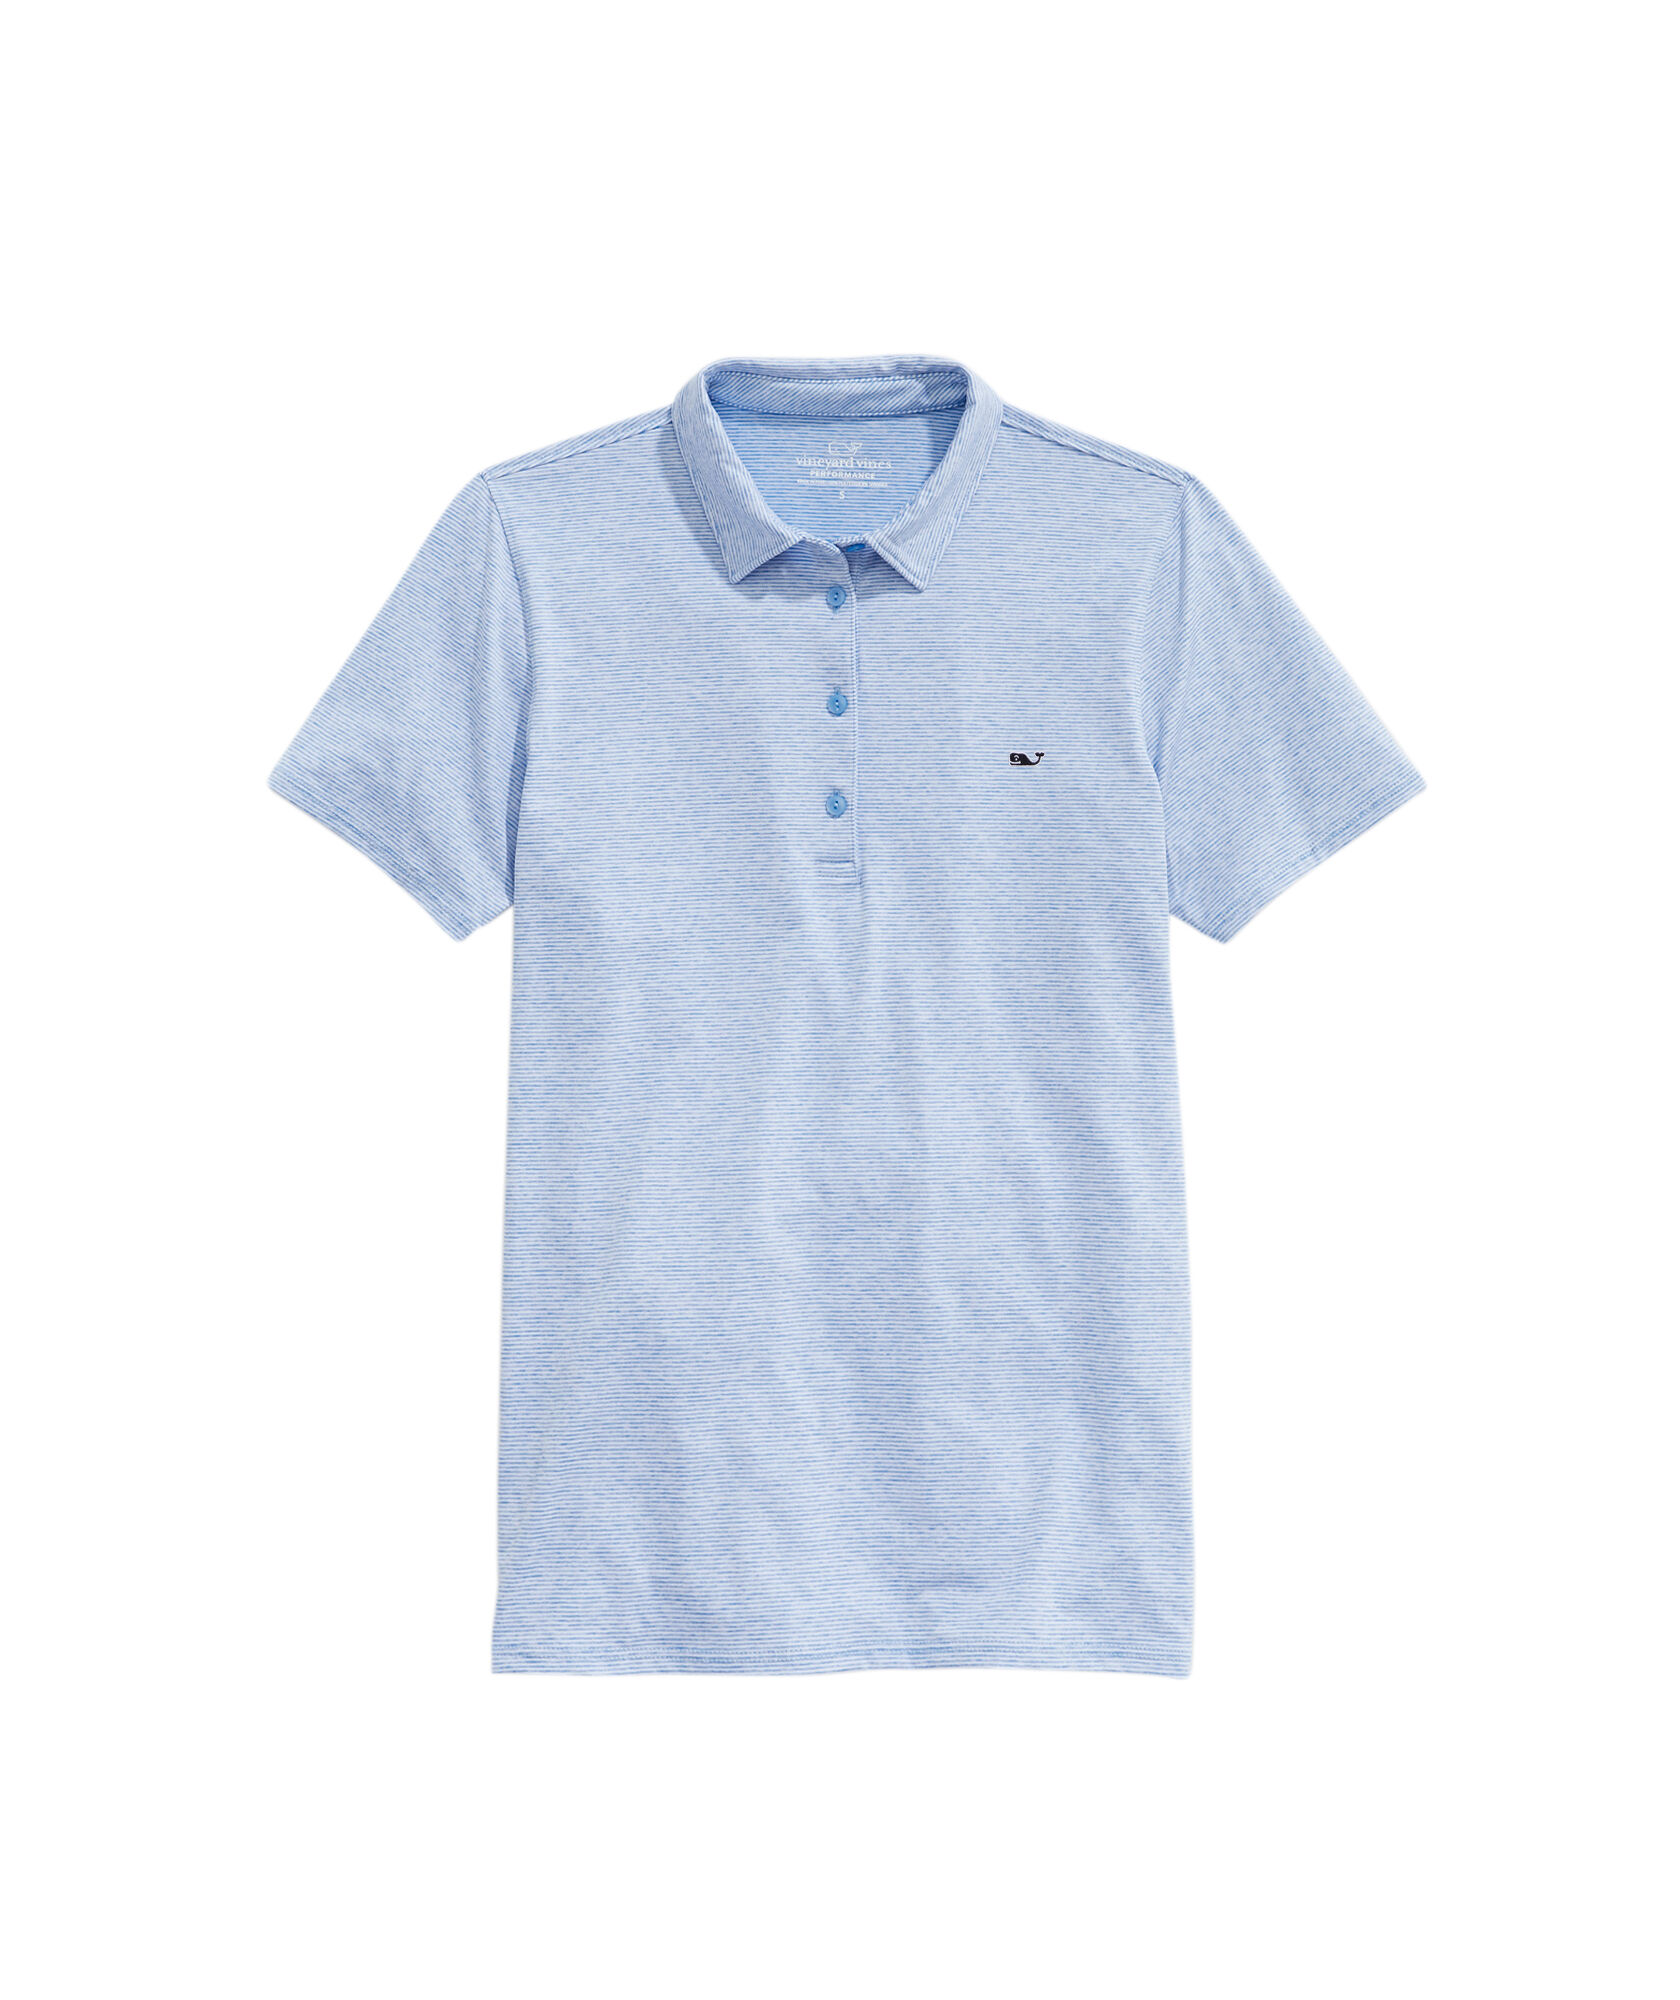 OUTLET Performance Striped Short-Sleeve Polo